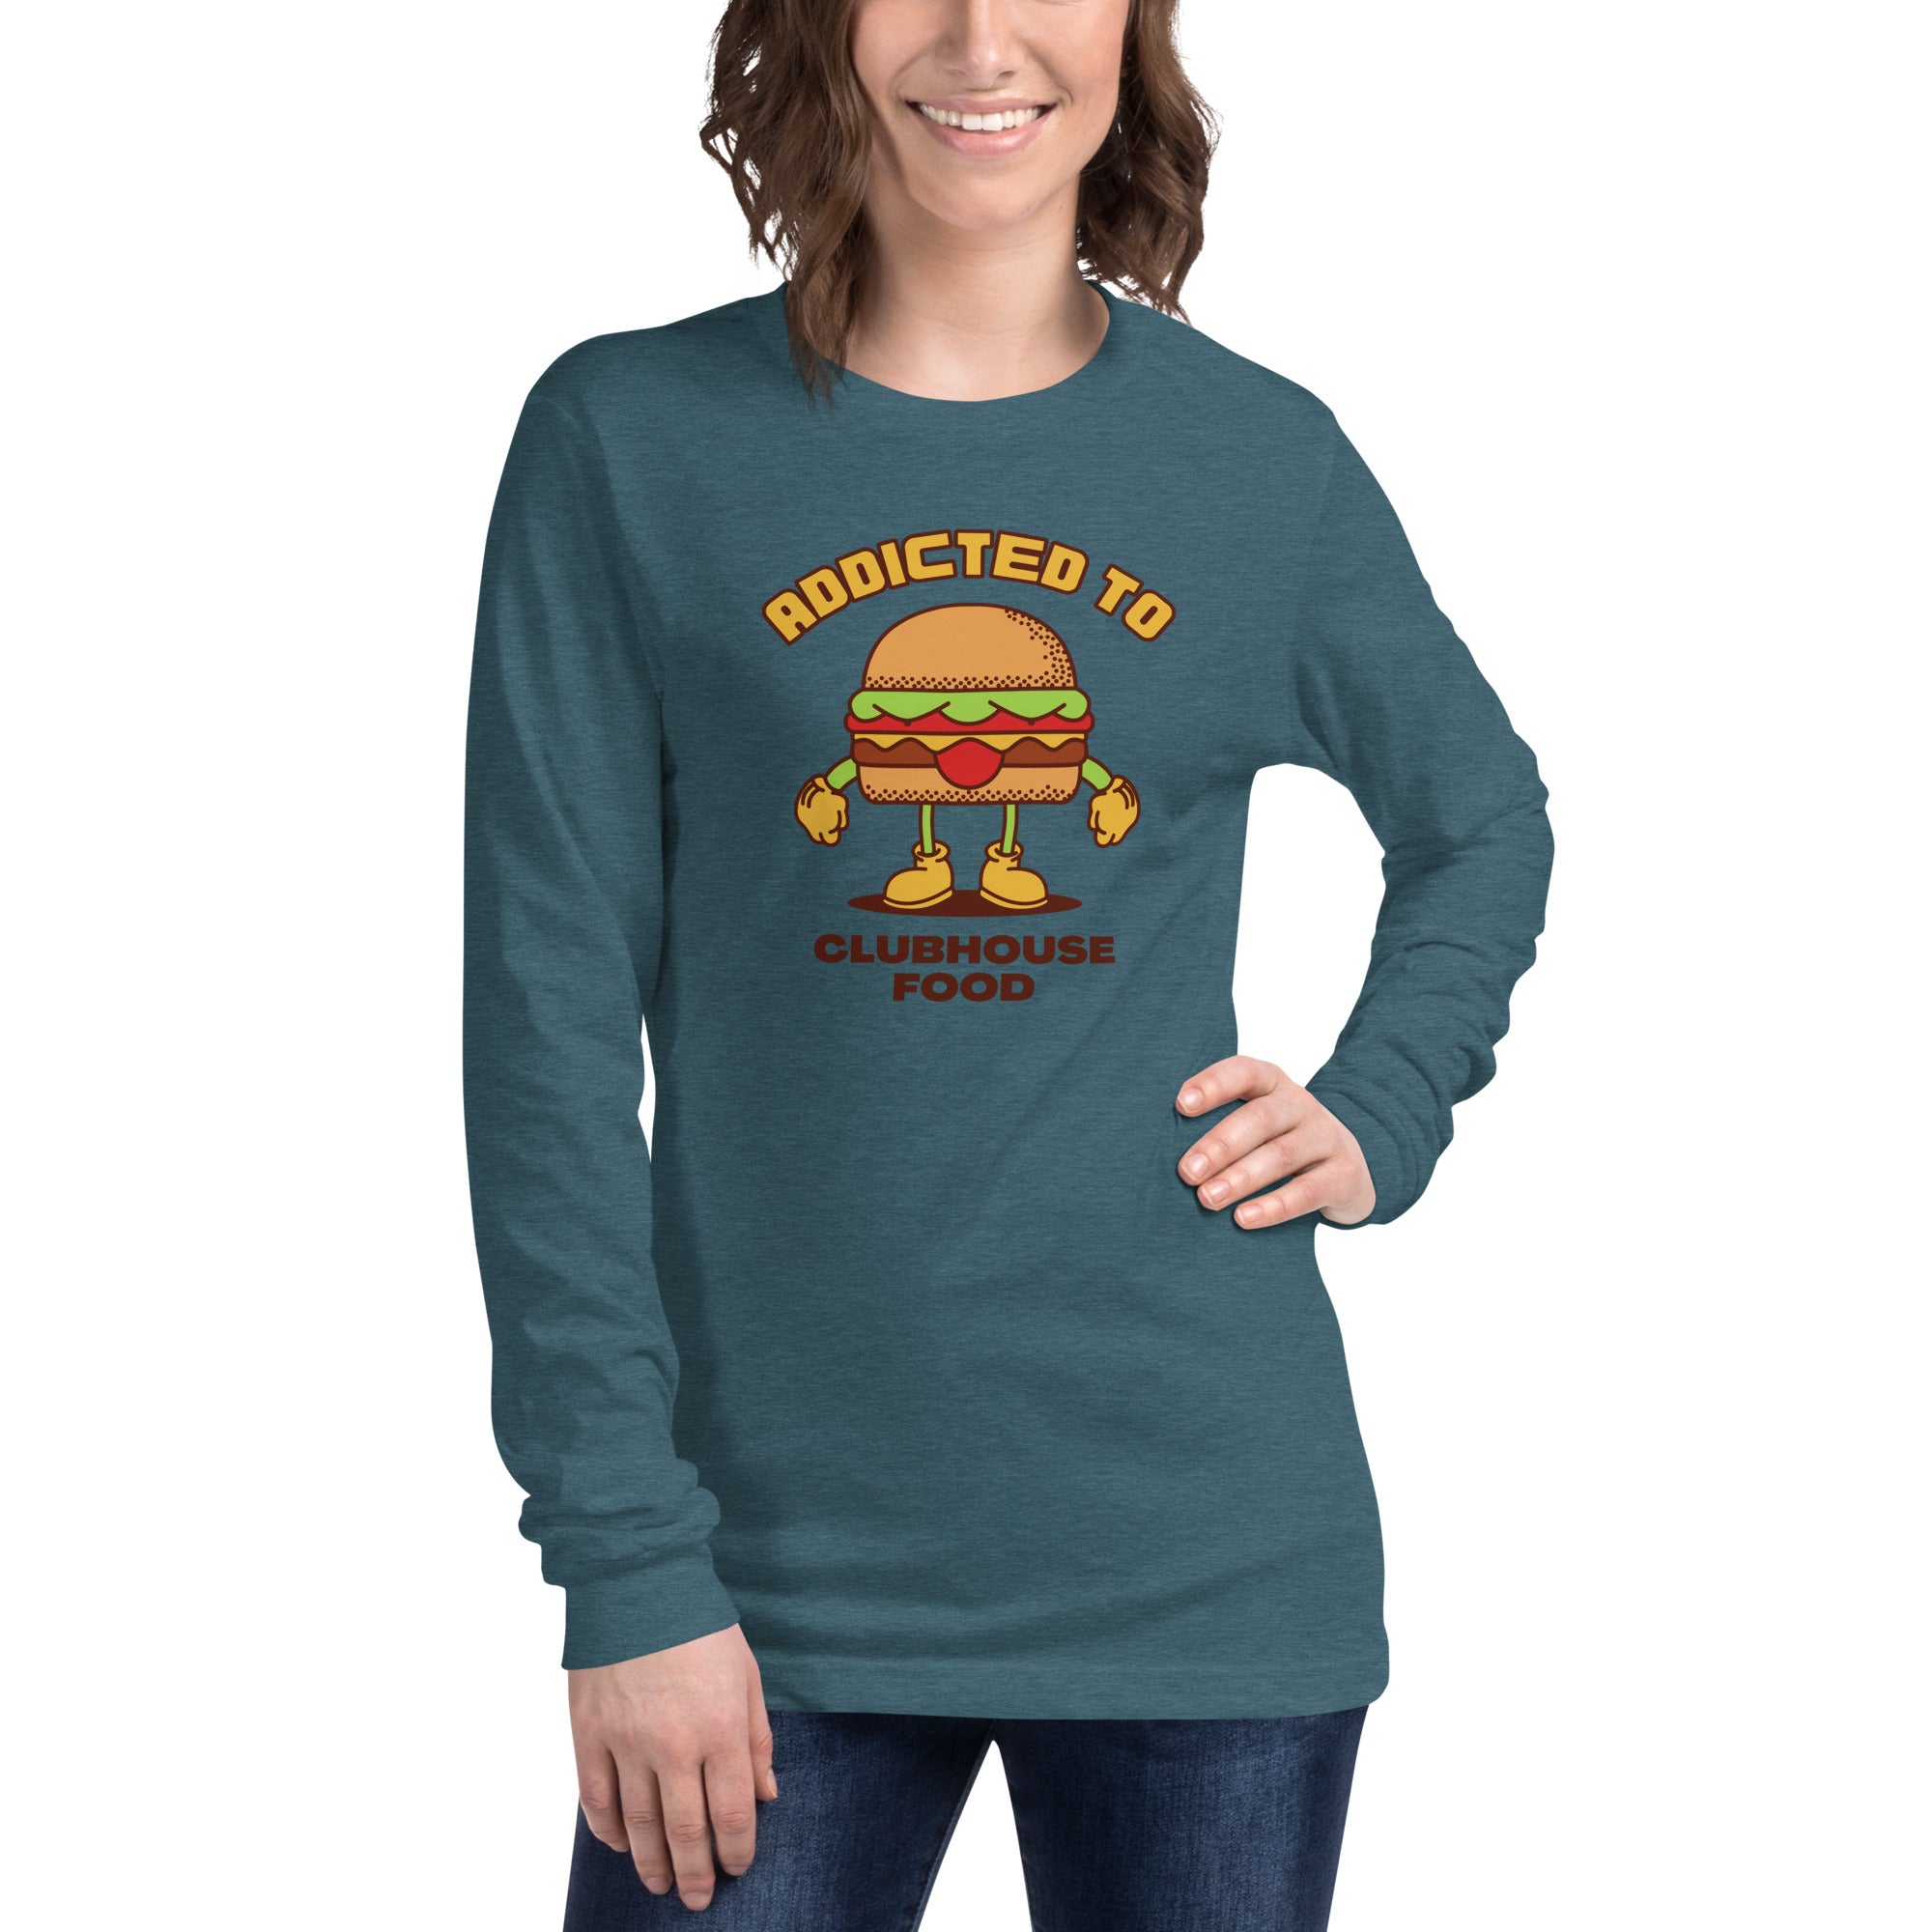 Addicted To Clubhouse Food Women's Select Long Sleeve